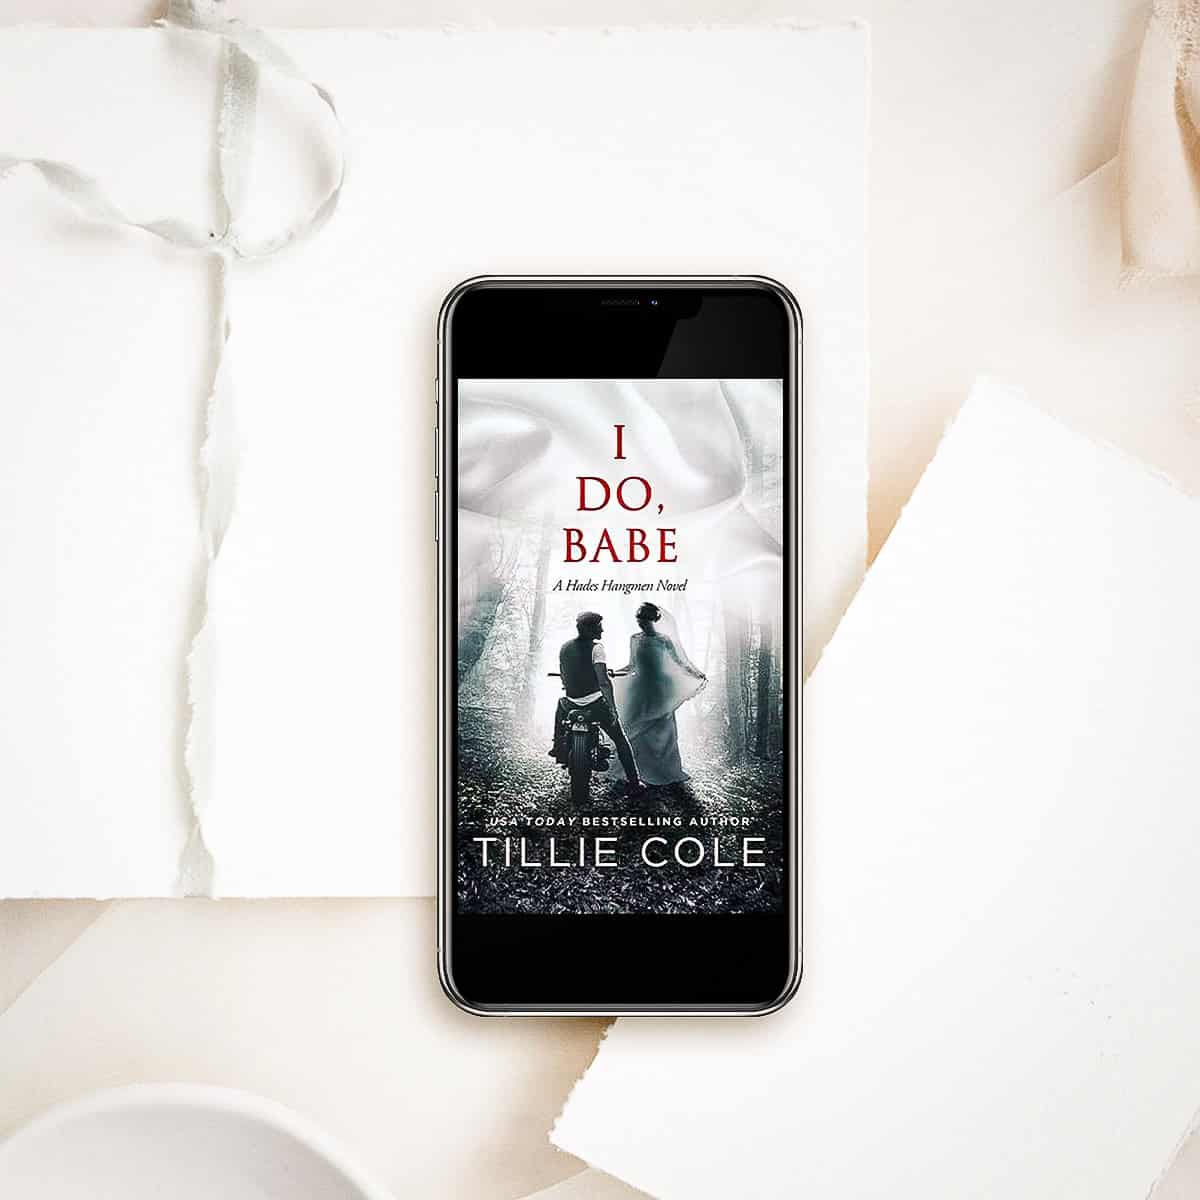 I Do, Babe by Tillie Cole, book #5.5 in the Hades Hangmen series, is a novella that features Styx and Mae's wedding (contemporary romance, MC romance)